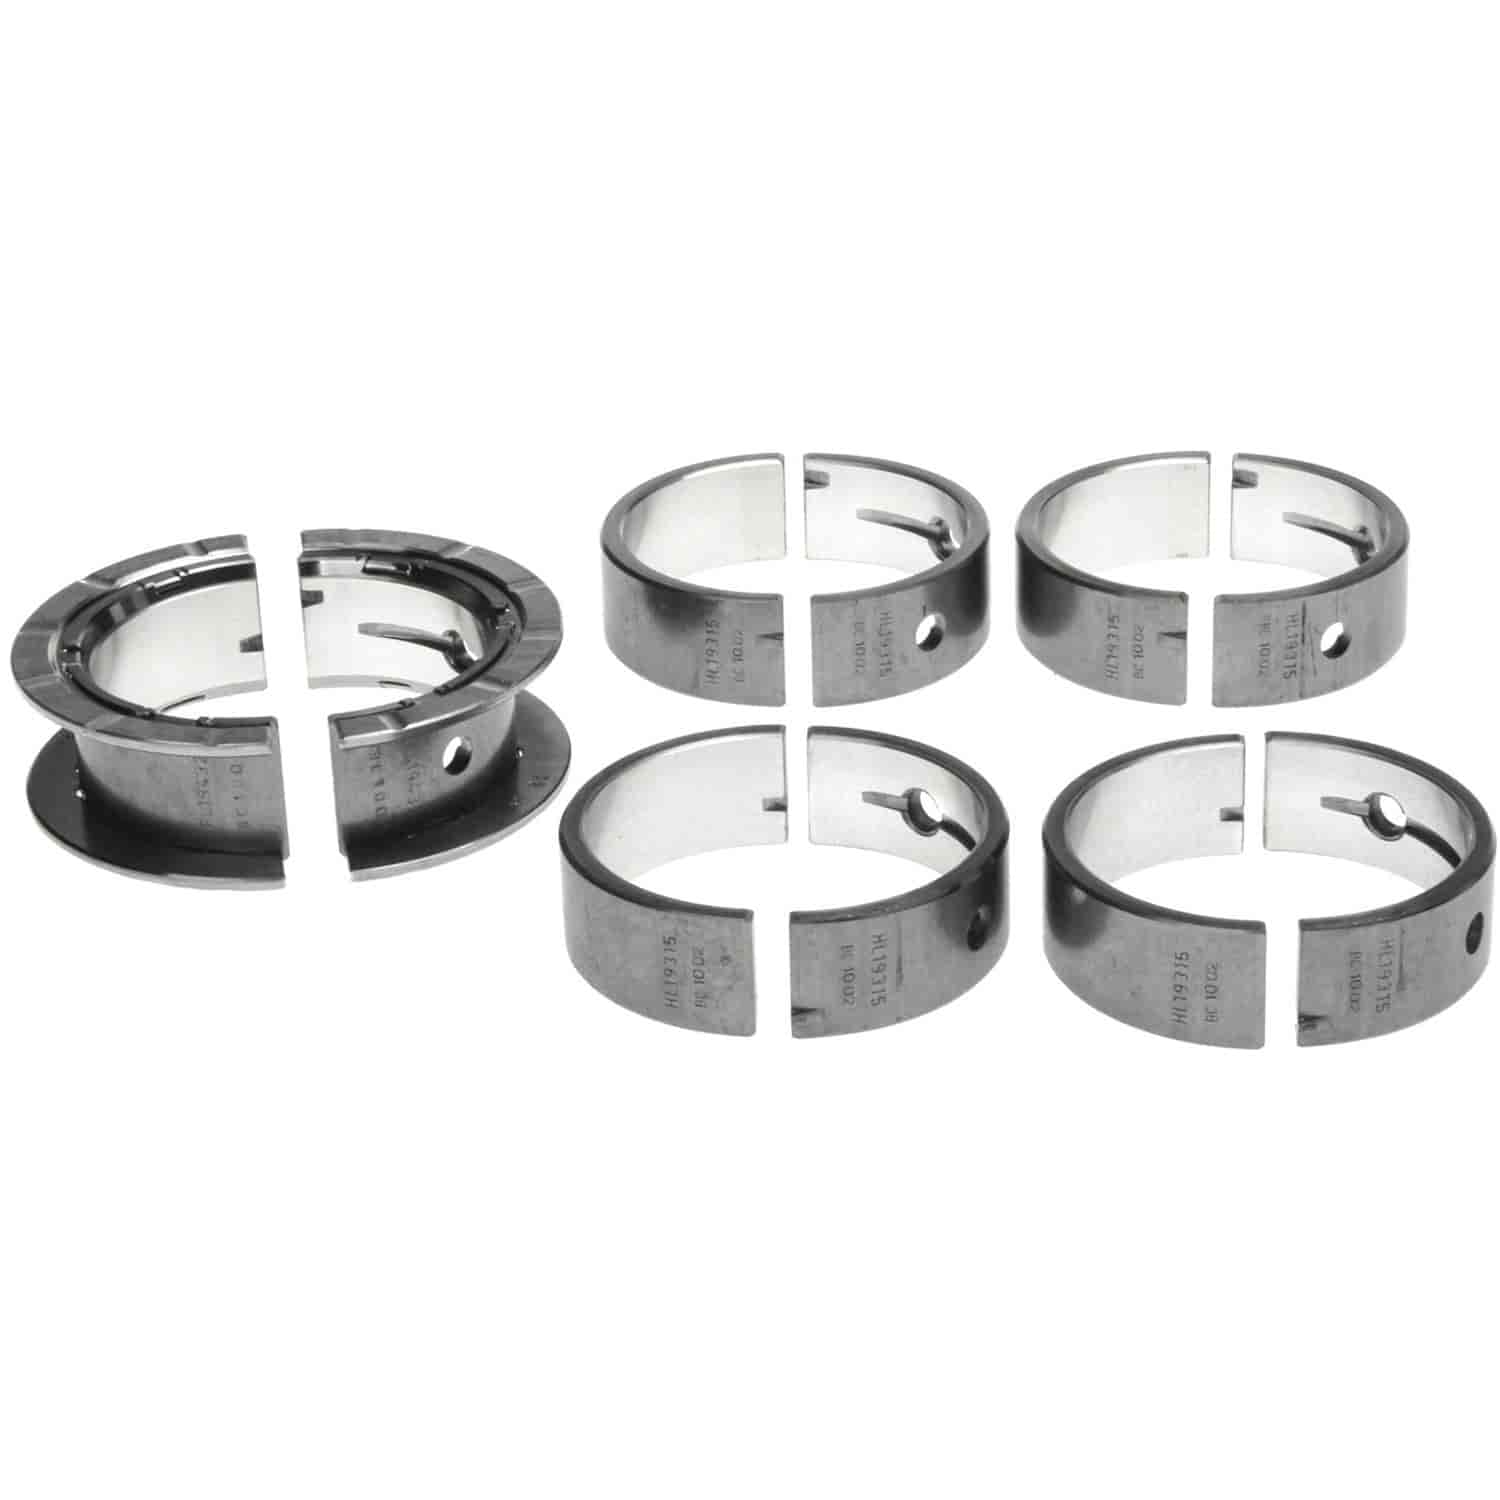 Main Bearing Set Chevy 2000-2015 L4 Ecotec 2.0/2.2/2.4L with -.030" Undersize